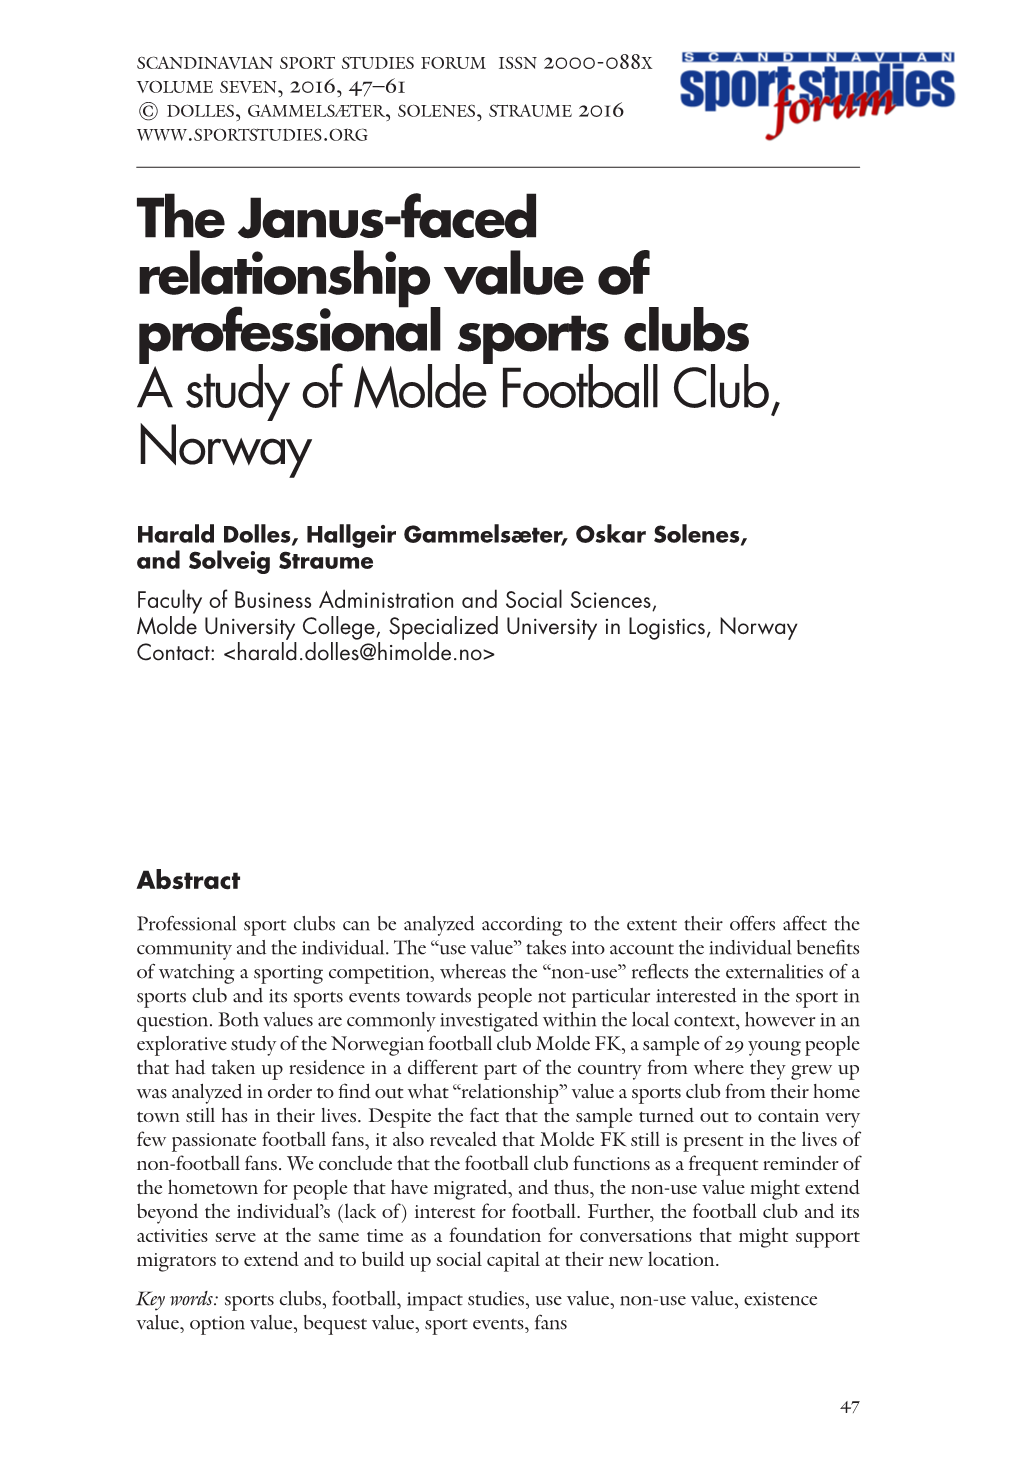 The Janus-Faced Relationship Value of Professional Sports Clubs a Study of Molde Football Club, Norway